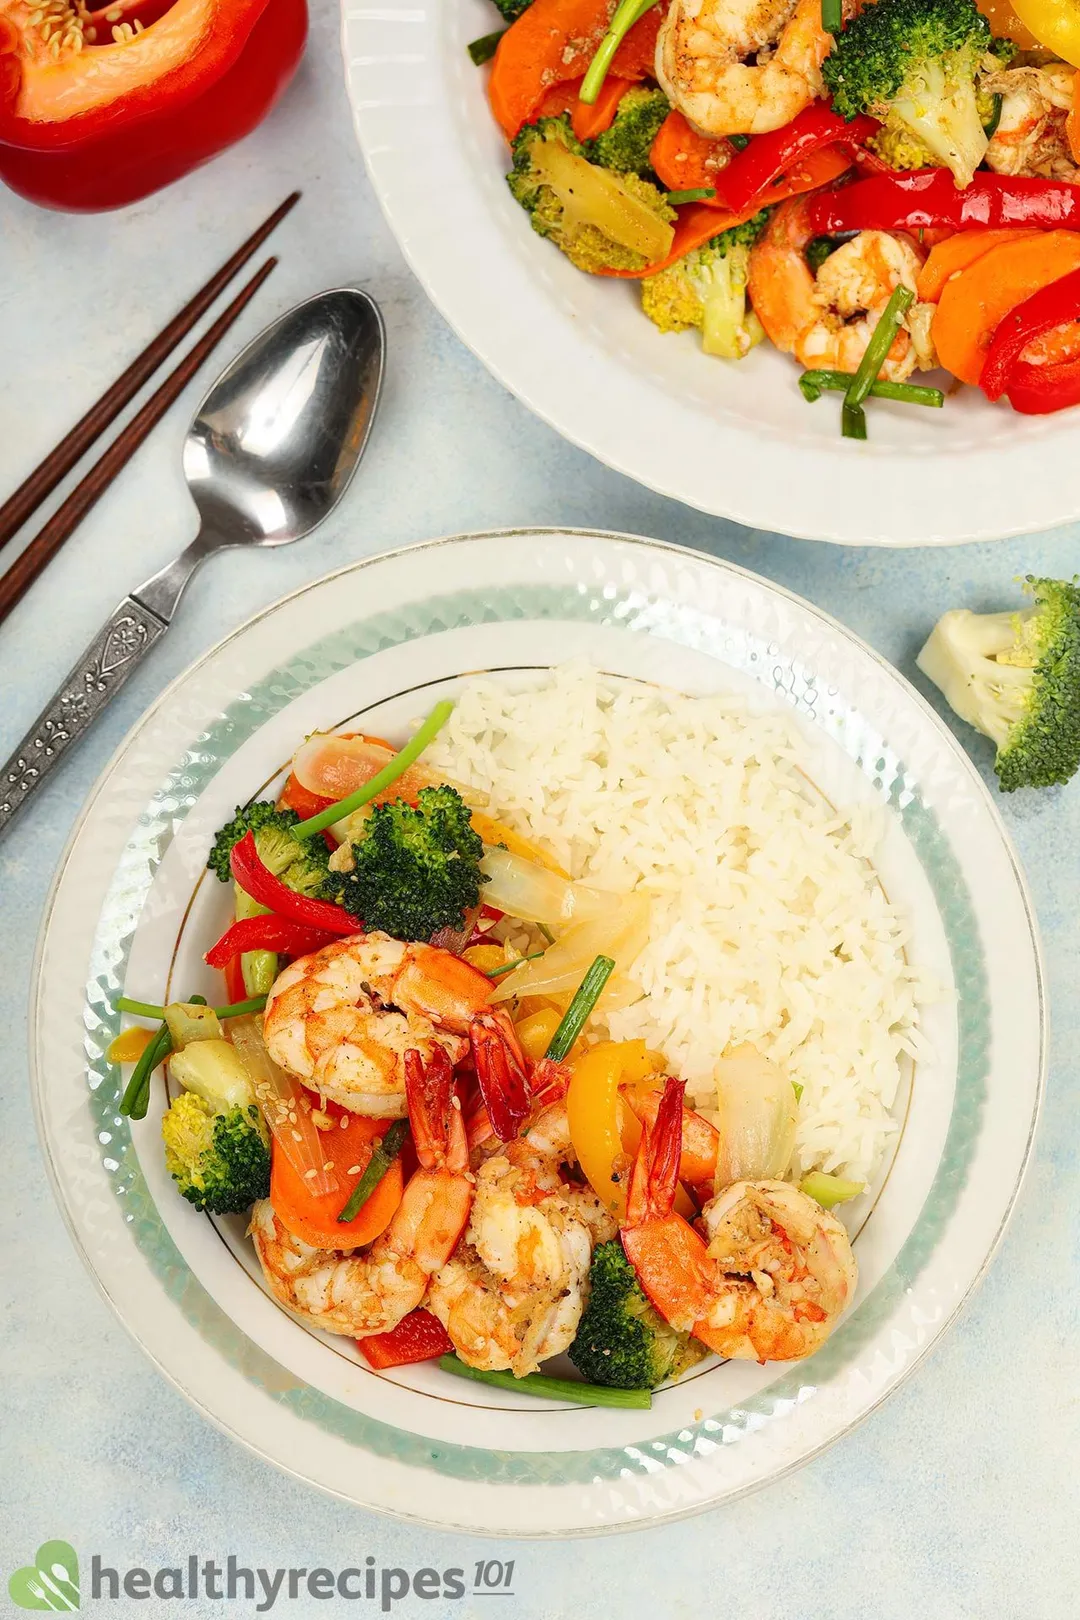 Pan-fried shrimp and vegetables served with rice on plates next to a spoon, a pair of chopsticks, half a bell pepper, and a broccoli floret.